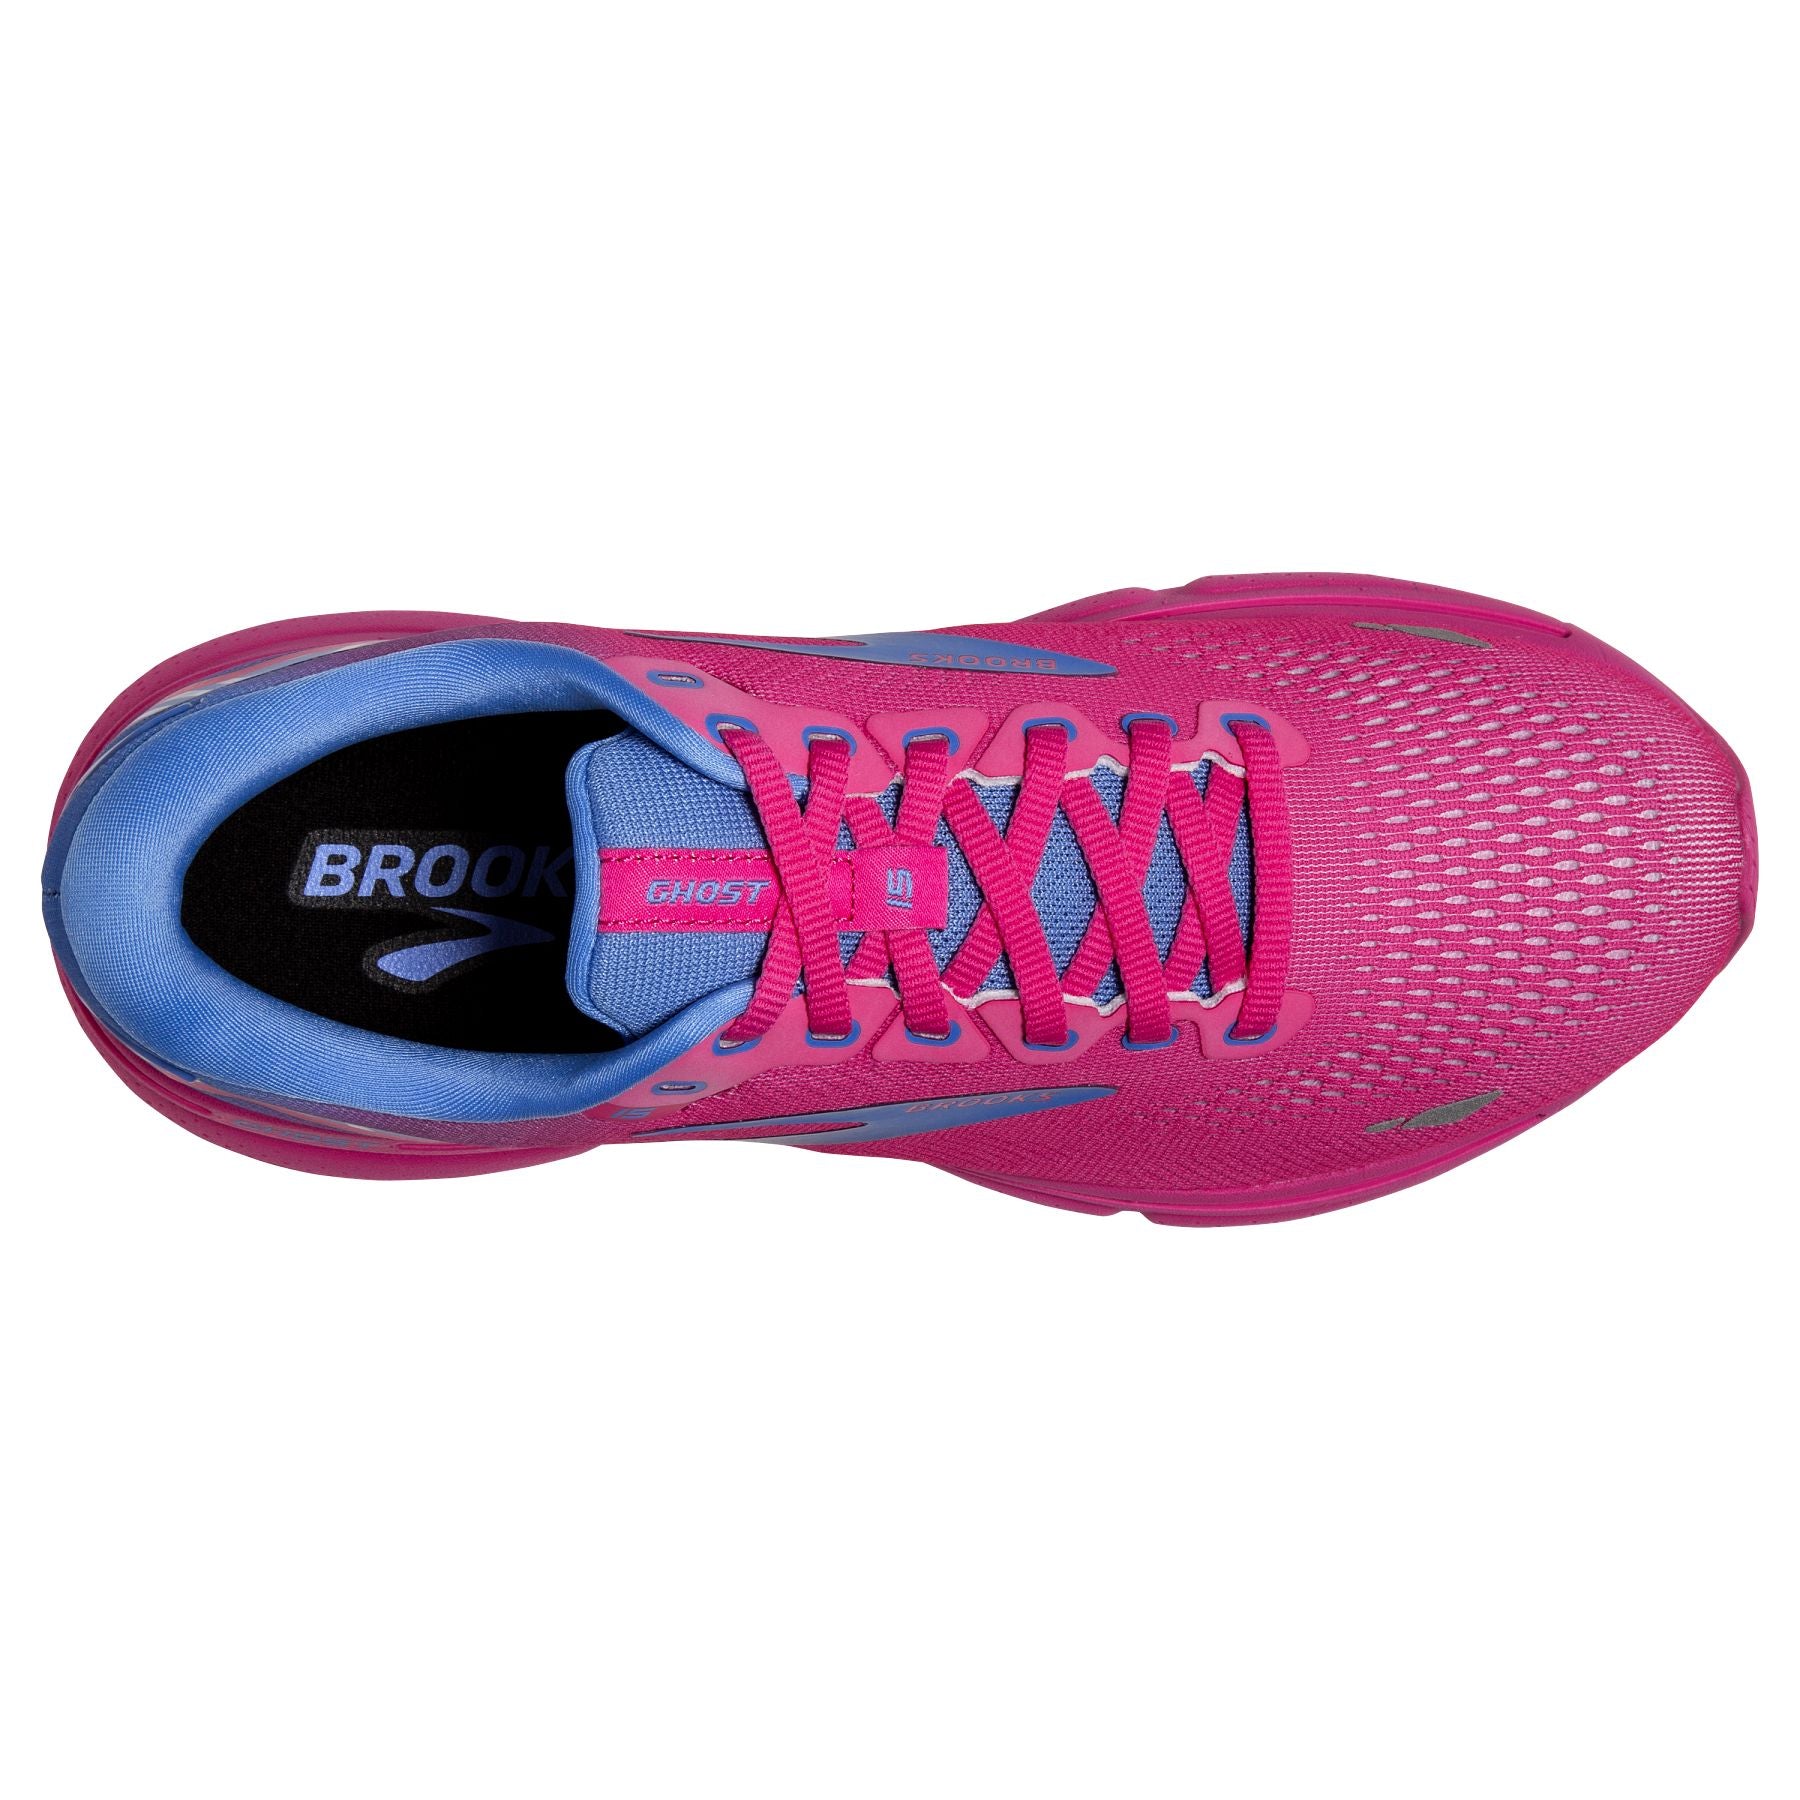 Top view of the Women's Ghost 15 by Brooks in the color Pink Glo/Blue/Fuchsia